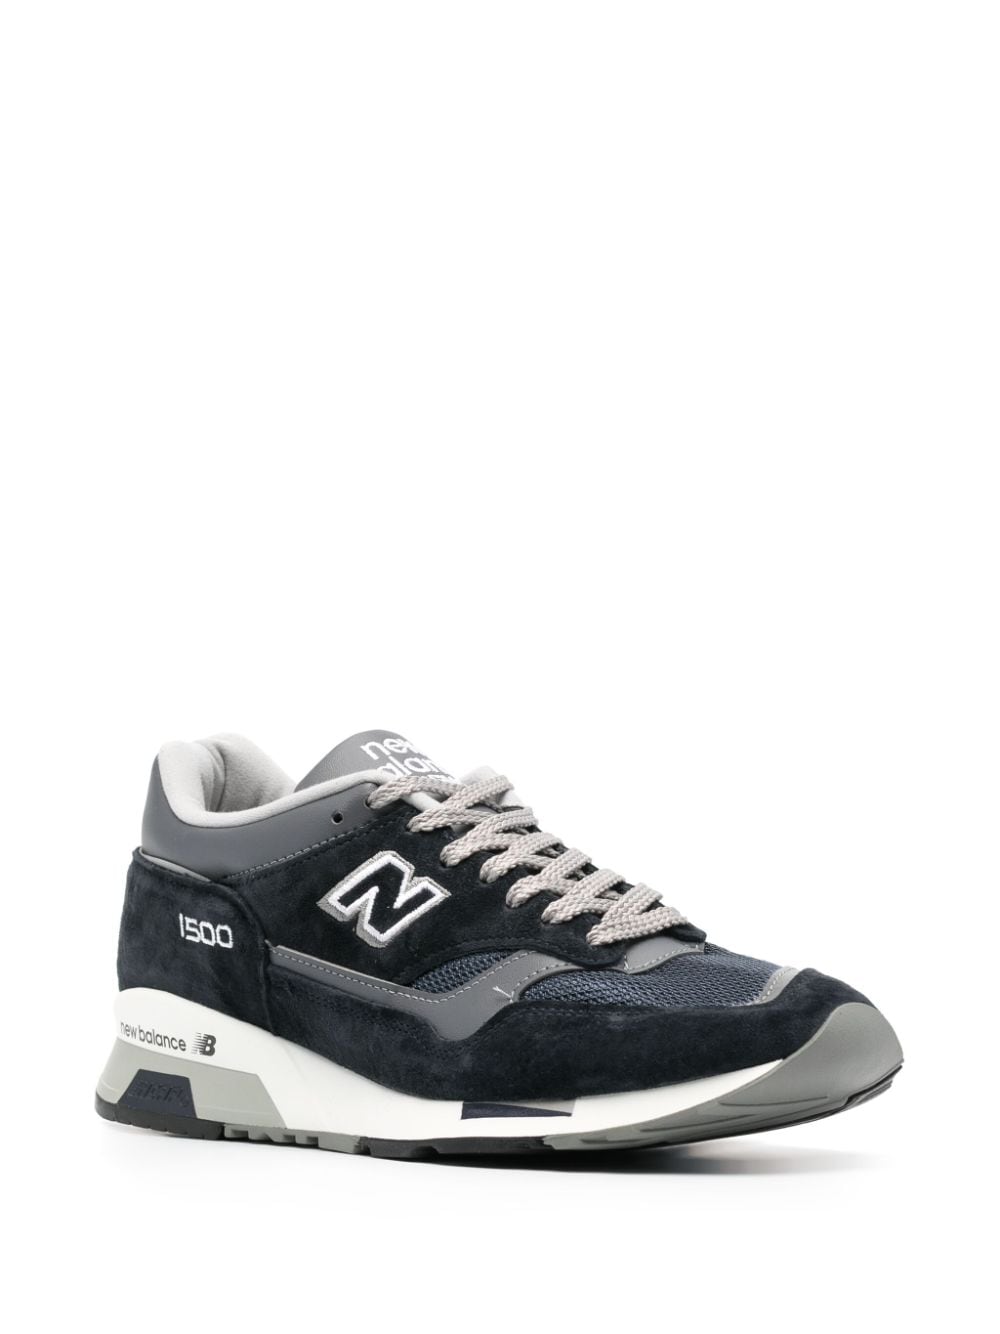 New Balance MADE in UK 1500 sneakers - Blauw